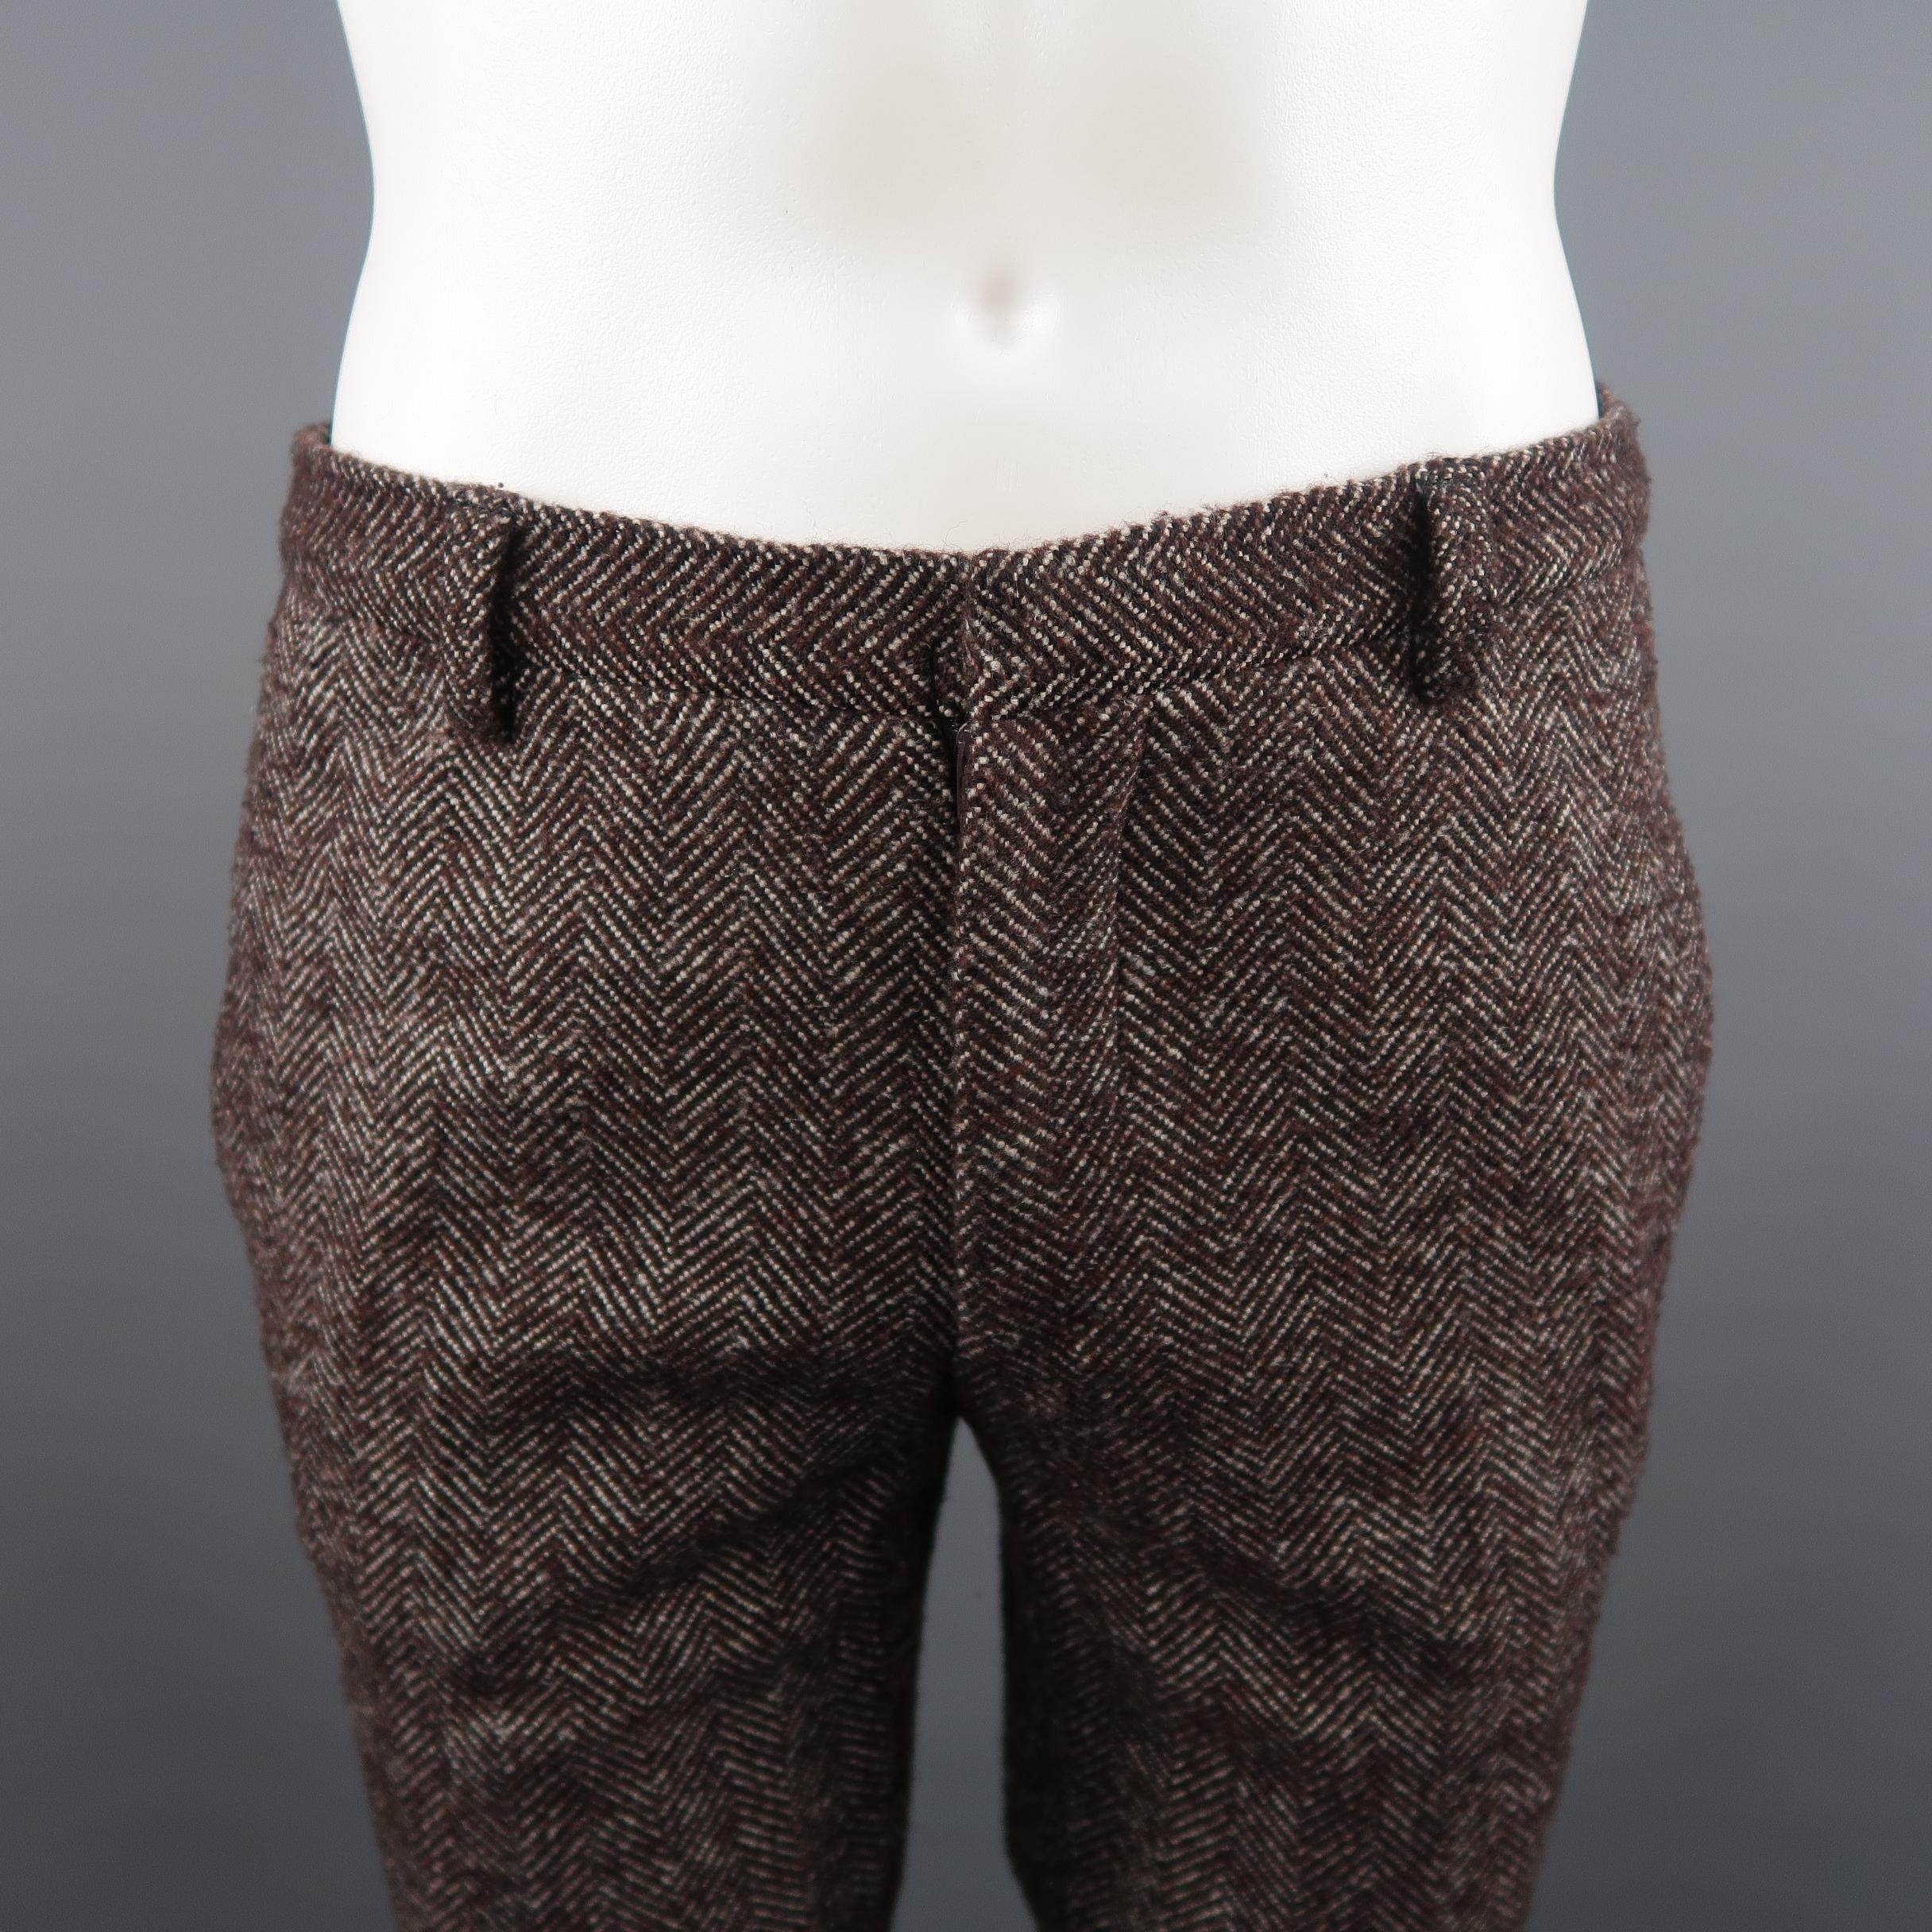 FENDI Casual Pants comes in brown and white tones in a herringbone wool blend material, with a flat front,  zip fly and seam pockets. Made in Italy.
 
Excellent Pre-Owned Condition.
Marked: 50 IT
 
Measurements:
 
Waist: 33 in.
Rise: 9.5 in.
Inseam: